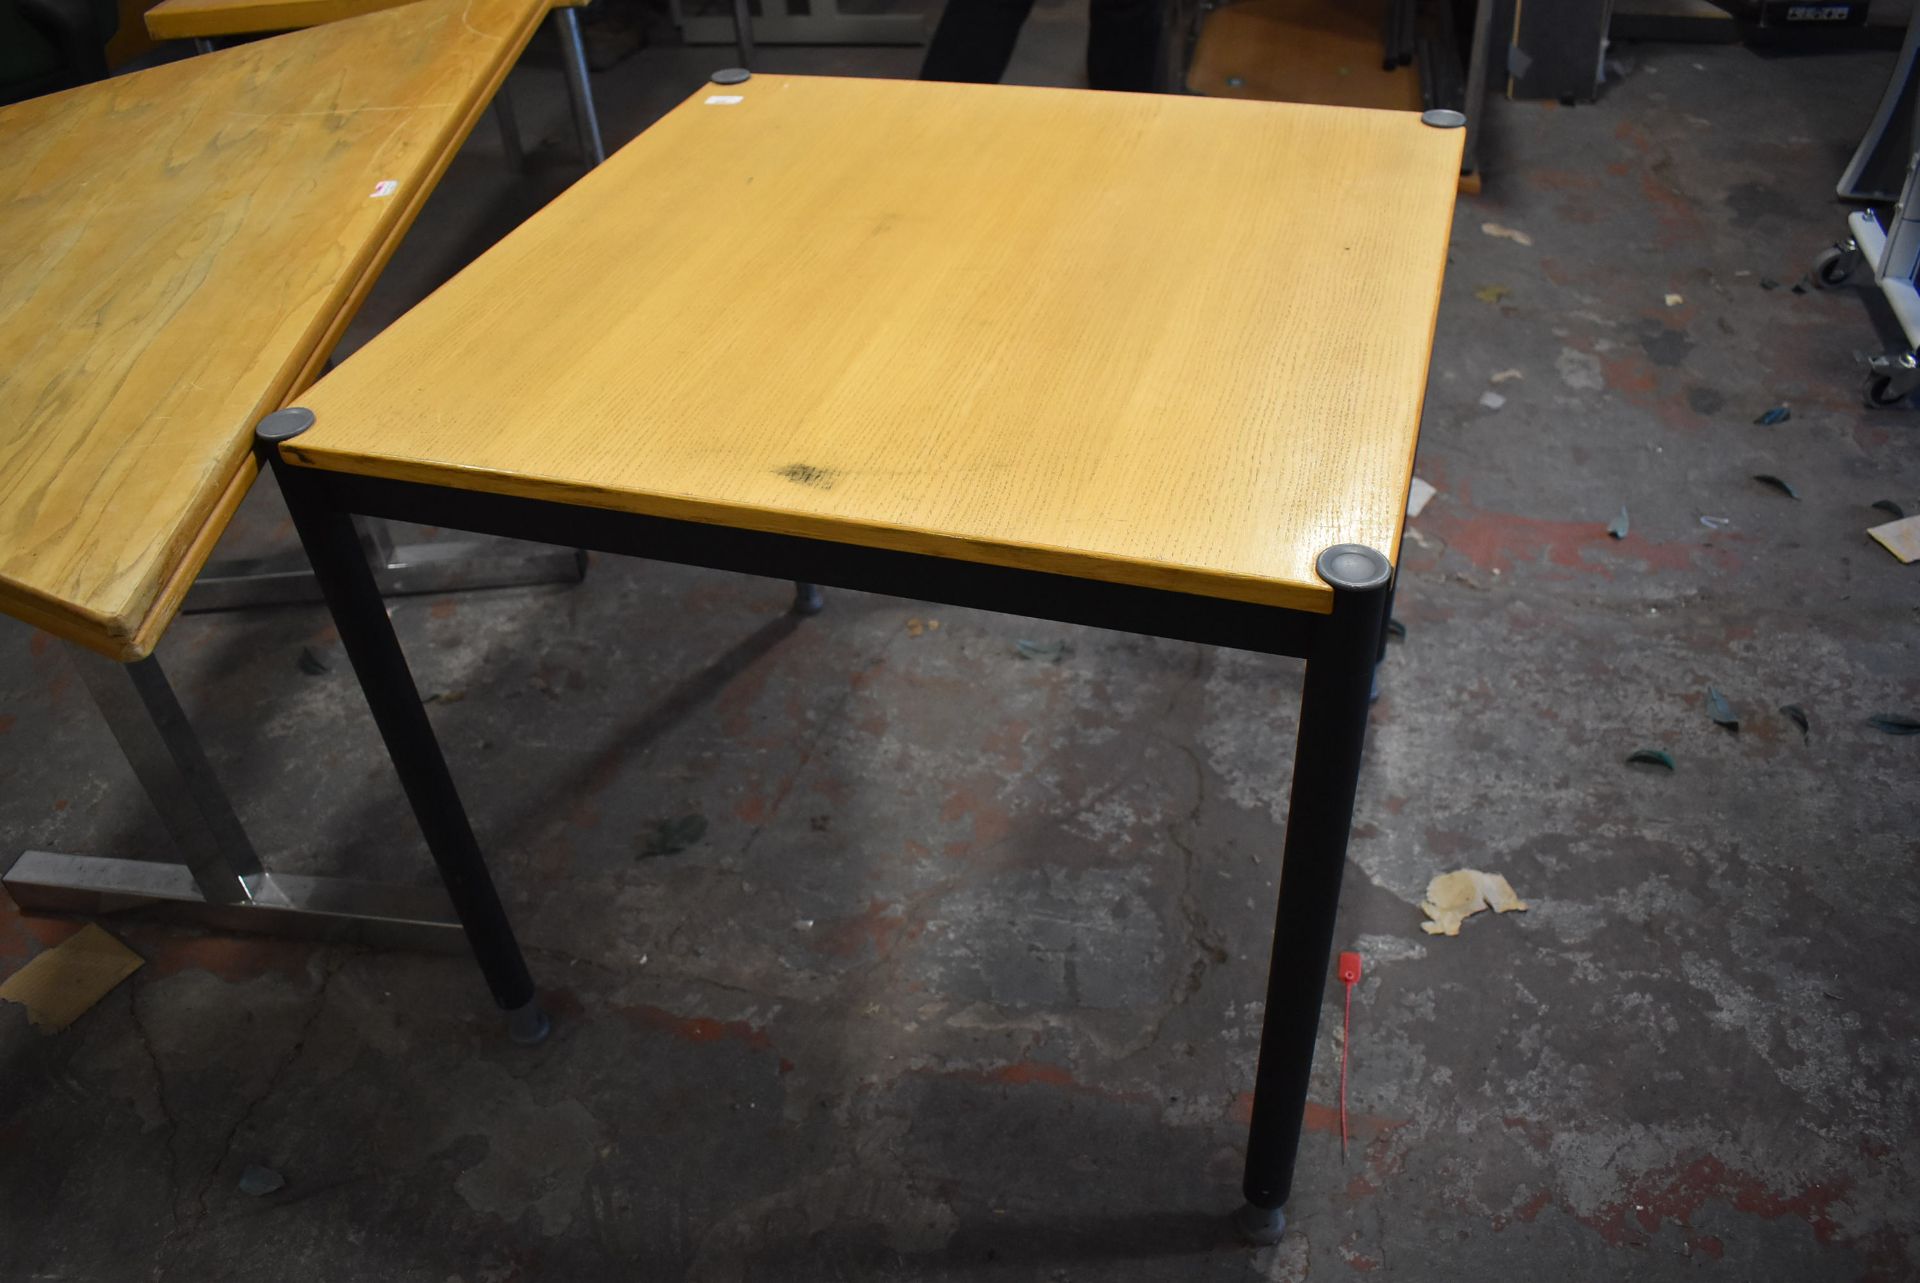 Two Oblong Tables 80x100cm and 80cm Square Tables - Image 2 of 3